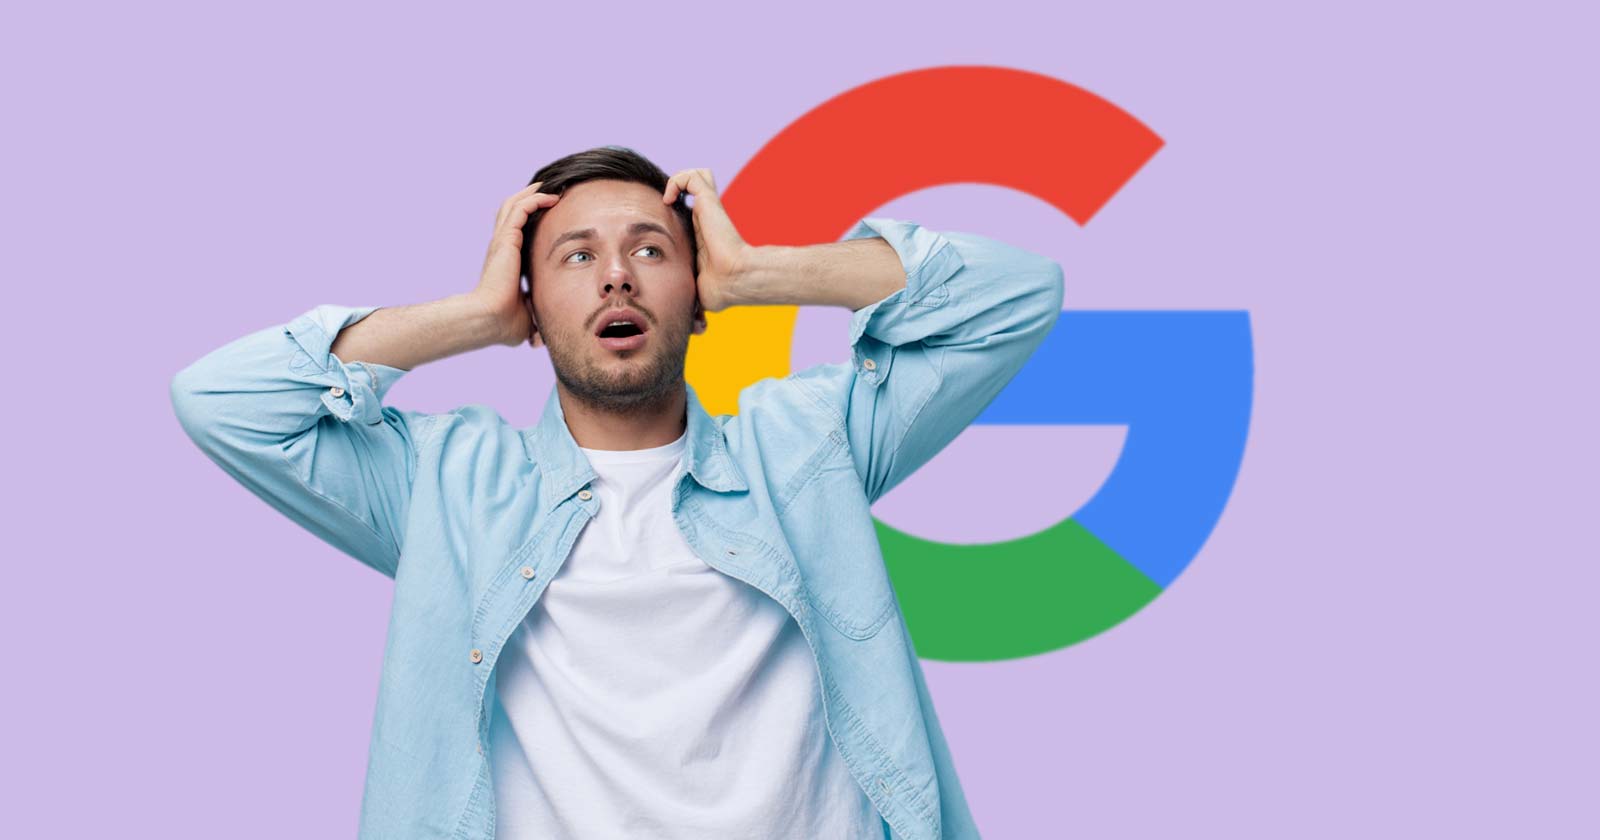 Google answers an SEO question about links